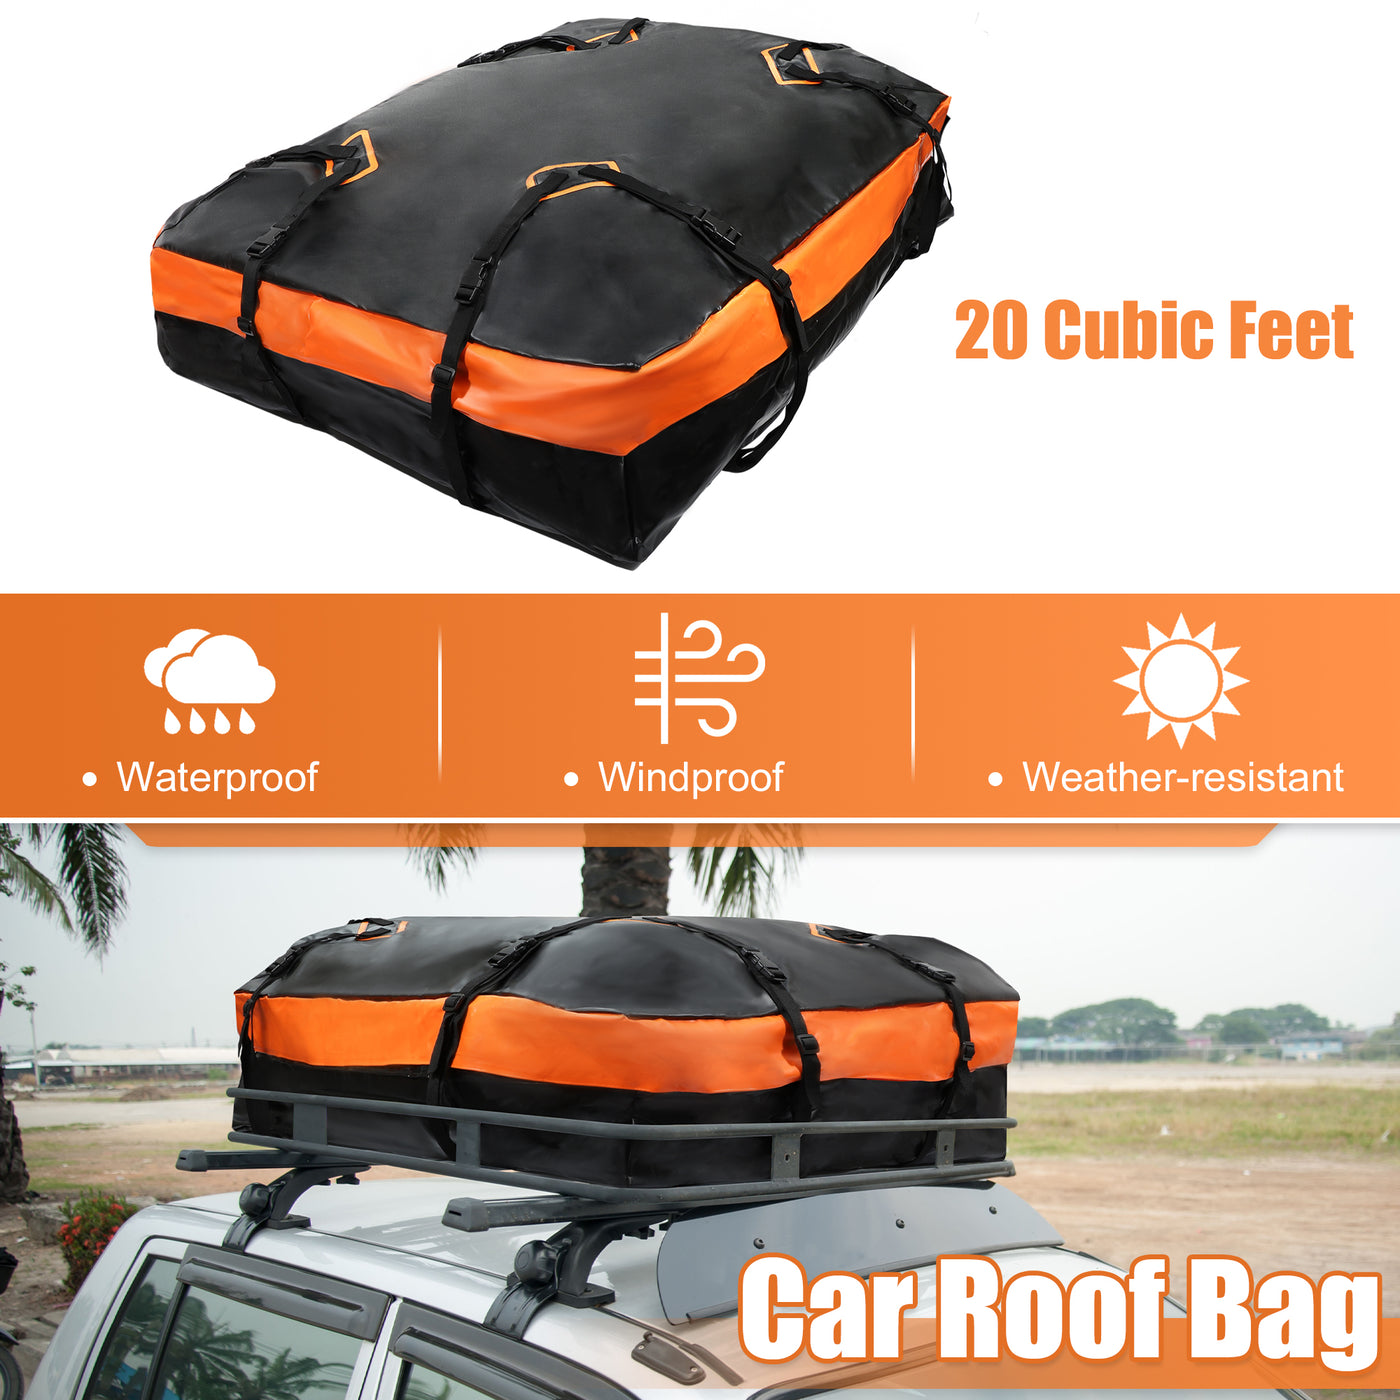 X AUTOHAUX 21 Cubic Feet Car Roof Bag Rooftop Cargo Carrier Bag Waterproof Luggage Carriers for Cars with or without Rack Anti-Slip Mat 6 Door Hooks Set